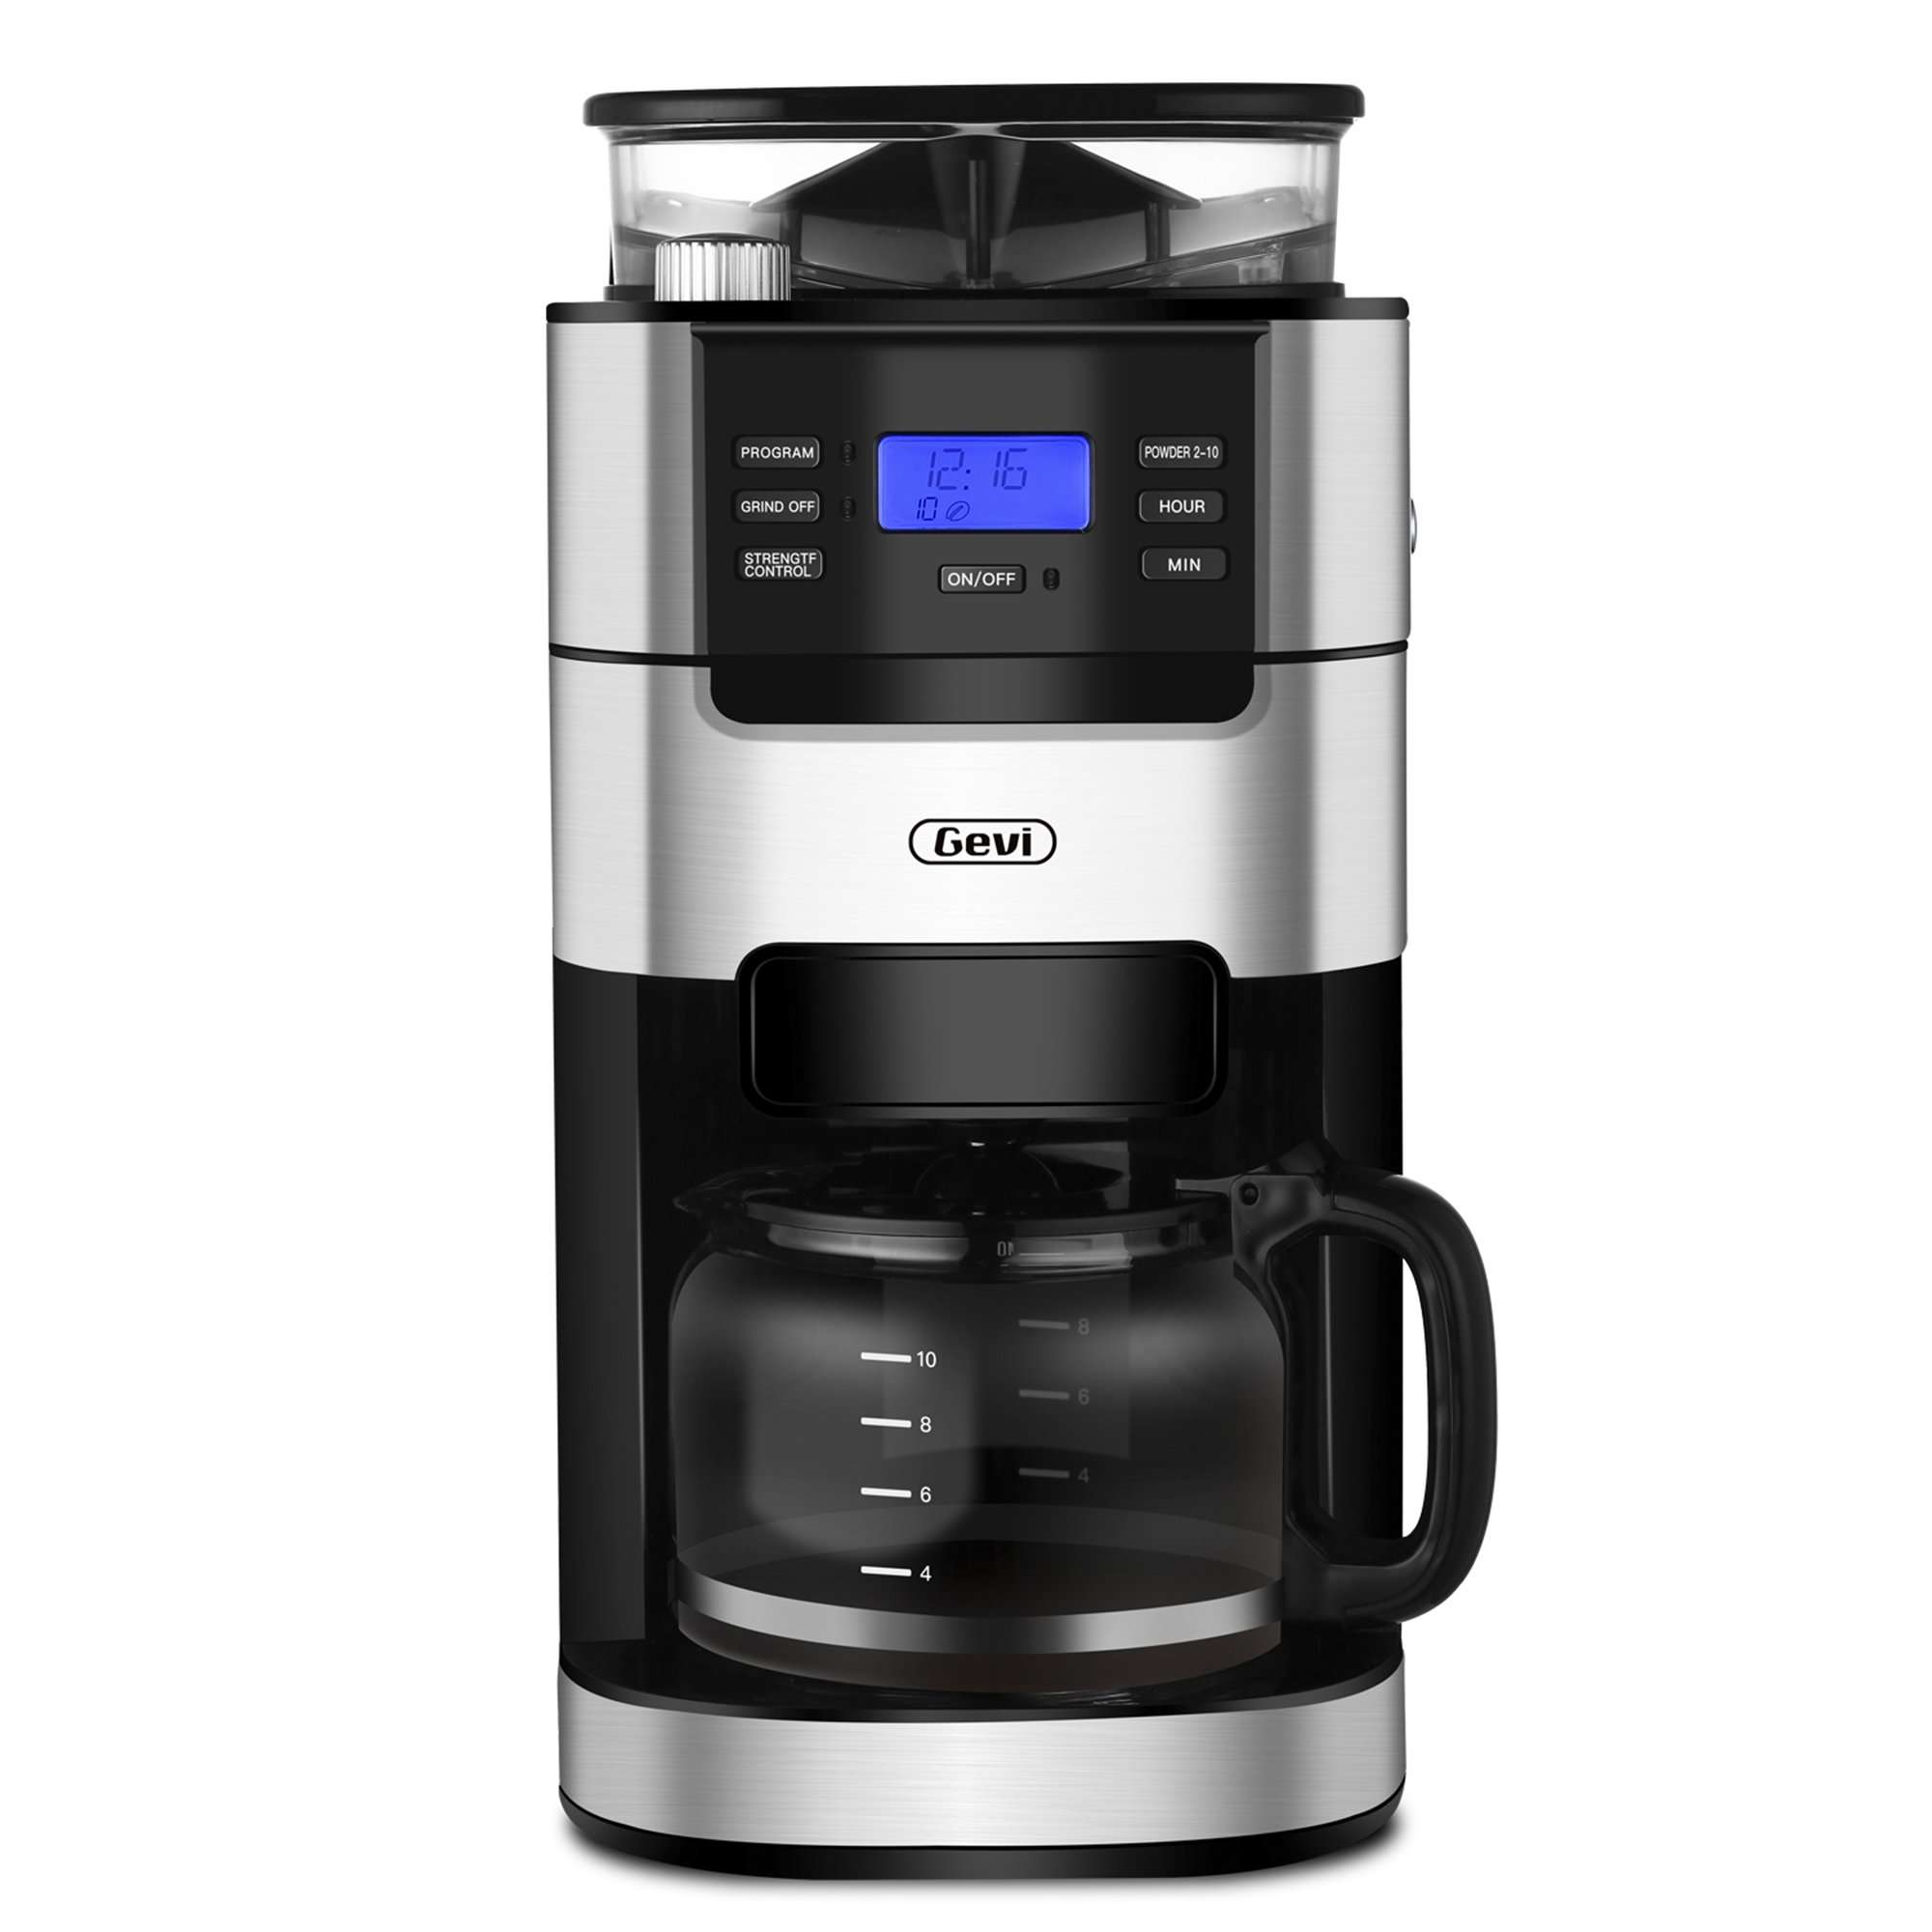 Gevi Grind and Brew Coffee Maker, 10